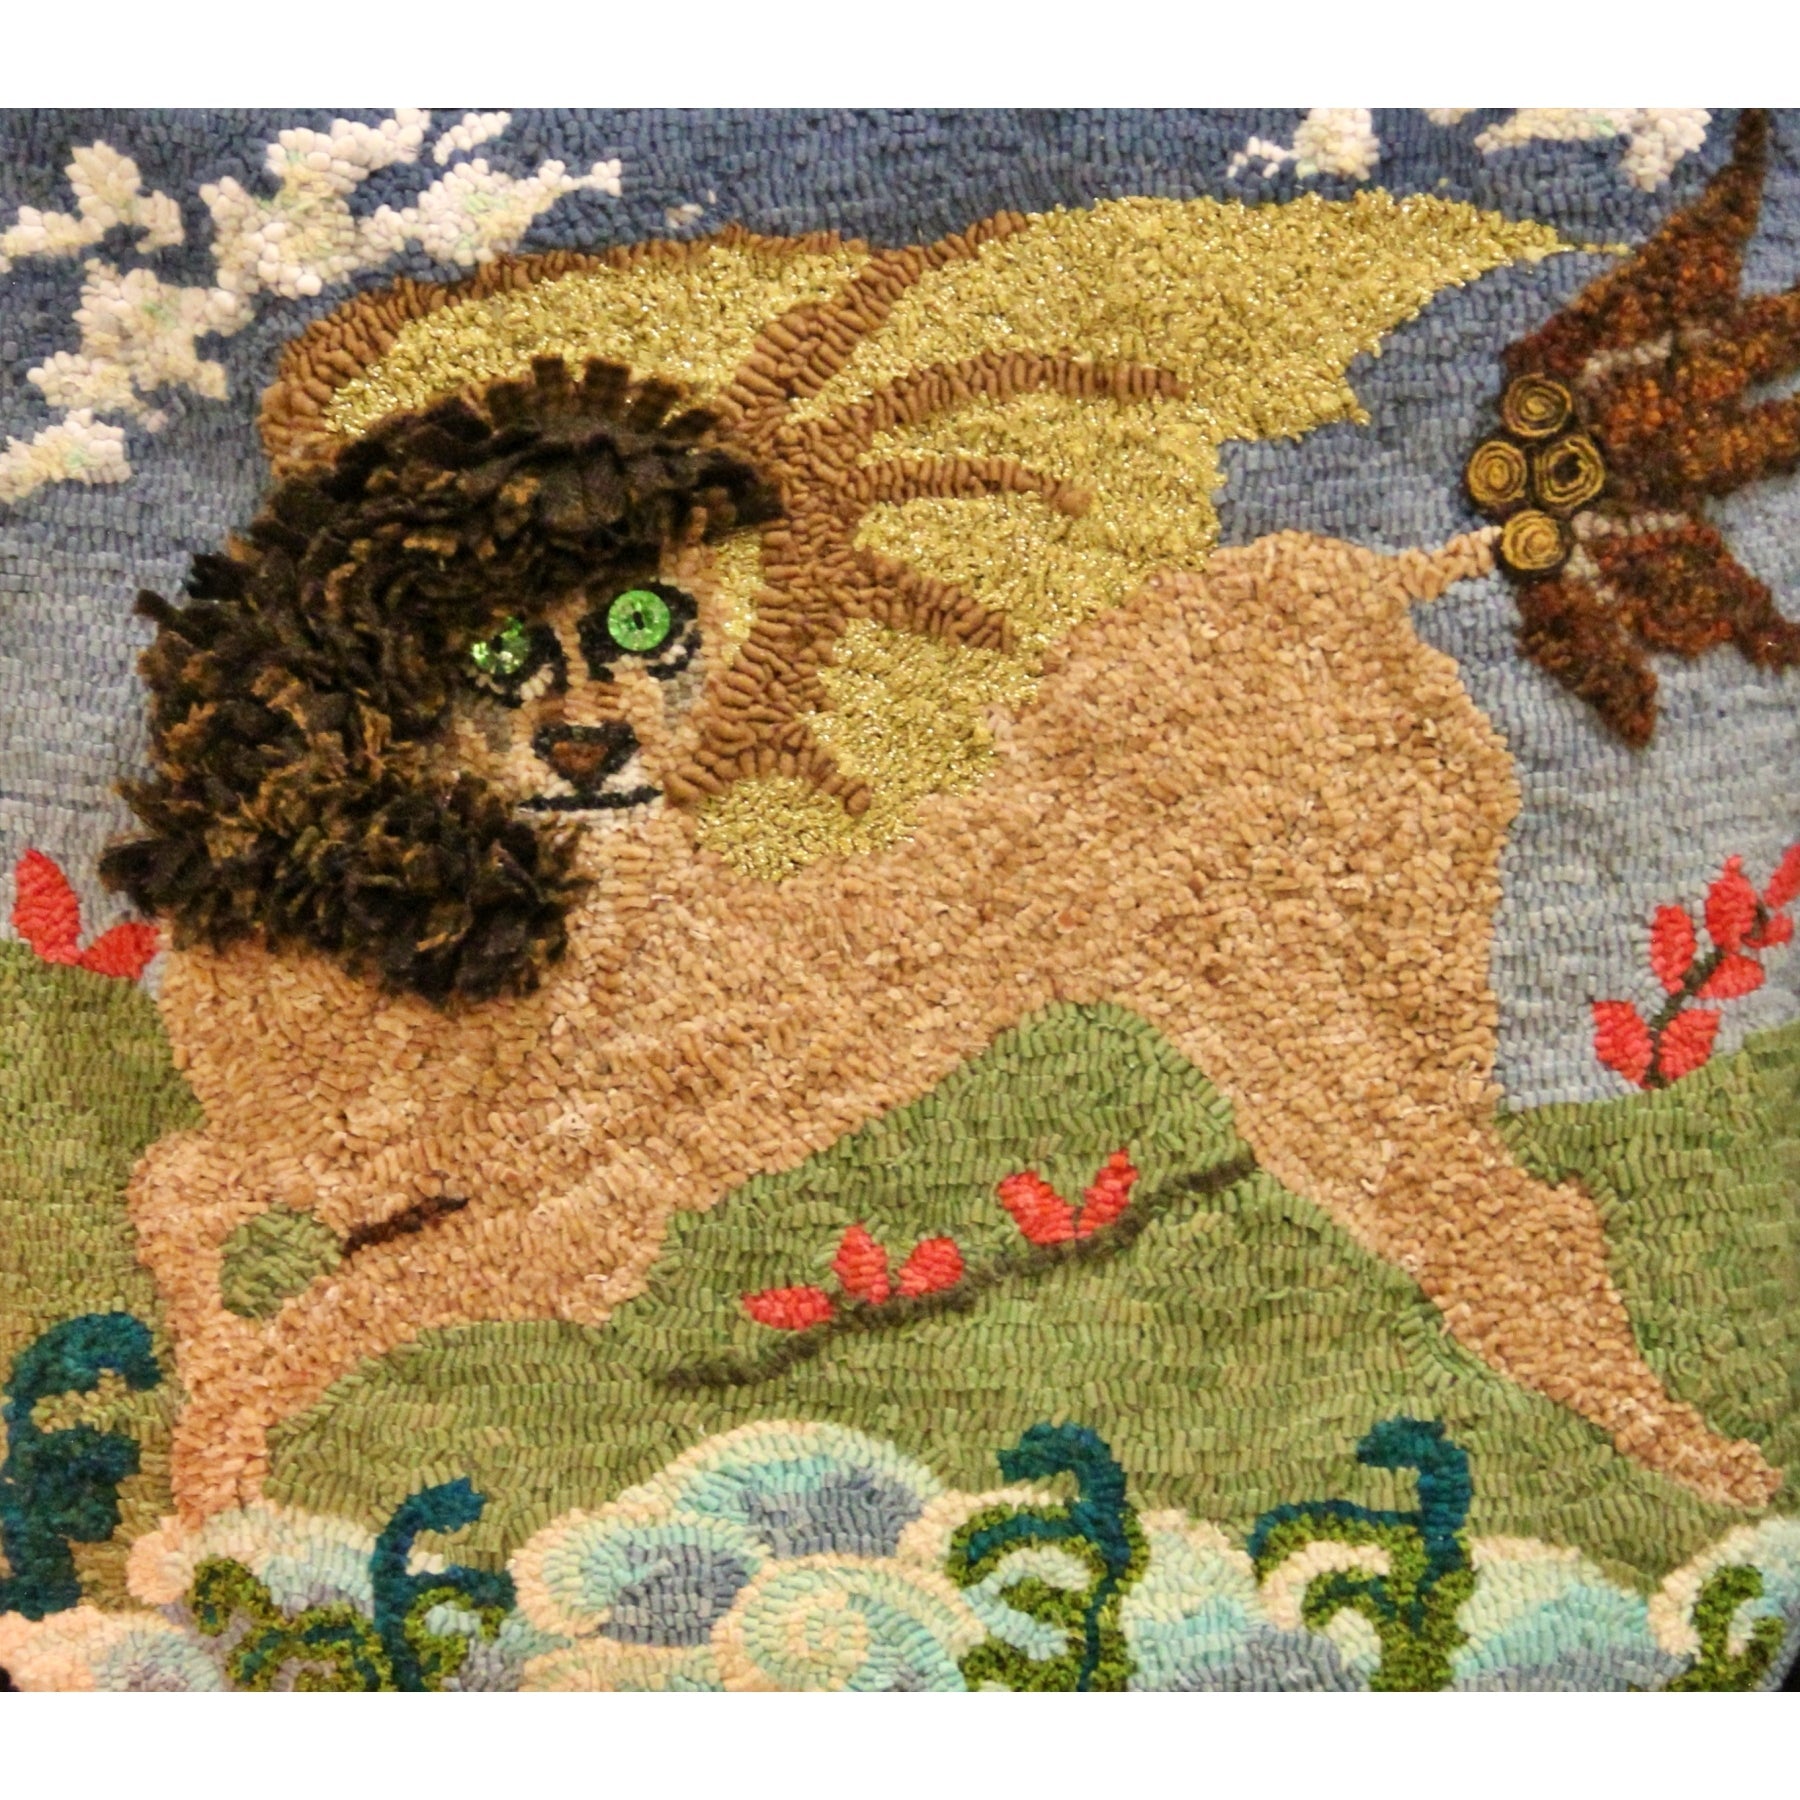 Winged Lion, rug hooked by Susan Barry